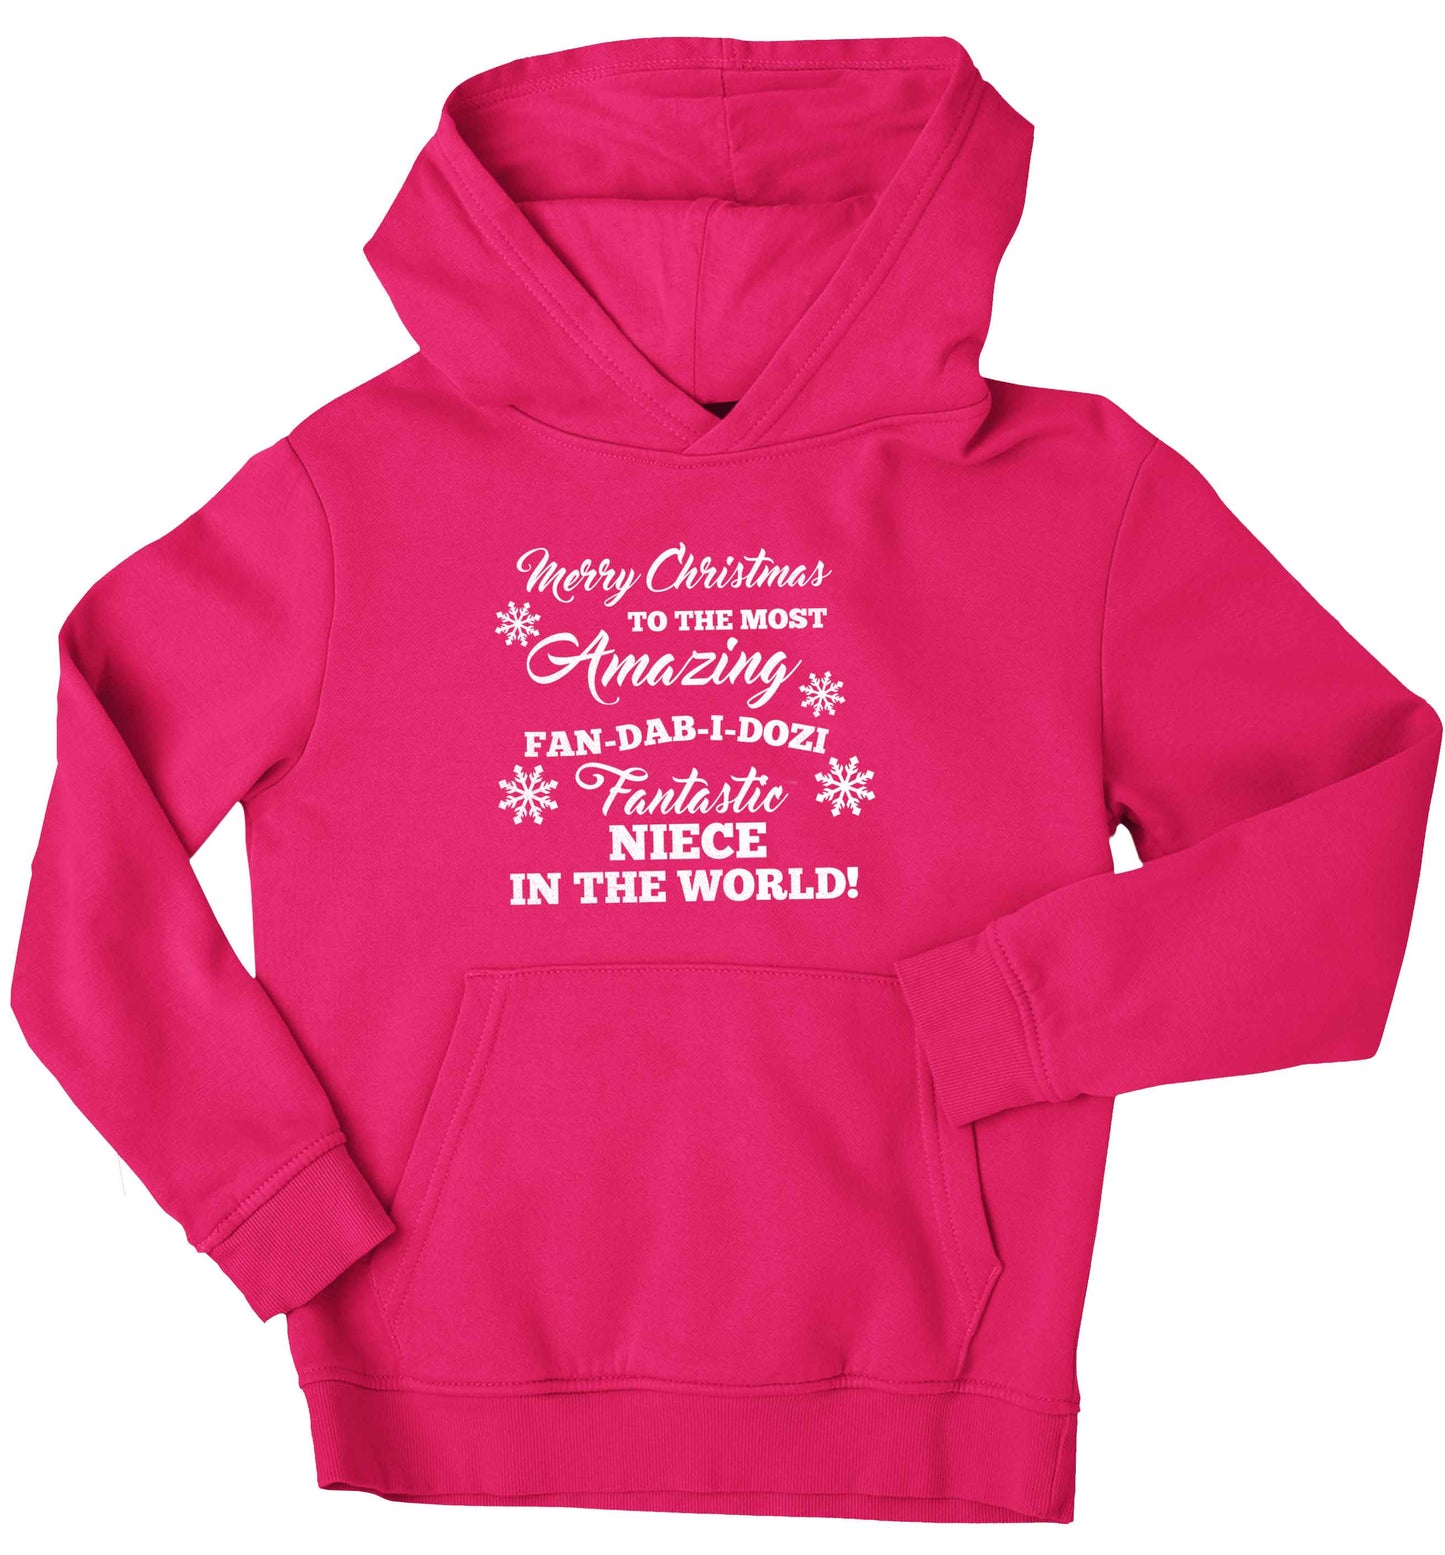 Merry Christmas to the most amazing fan-dab-i-dozi fantasic Niece in the world children's pink hoodie 12-13 Years